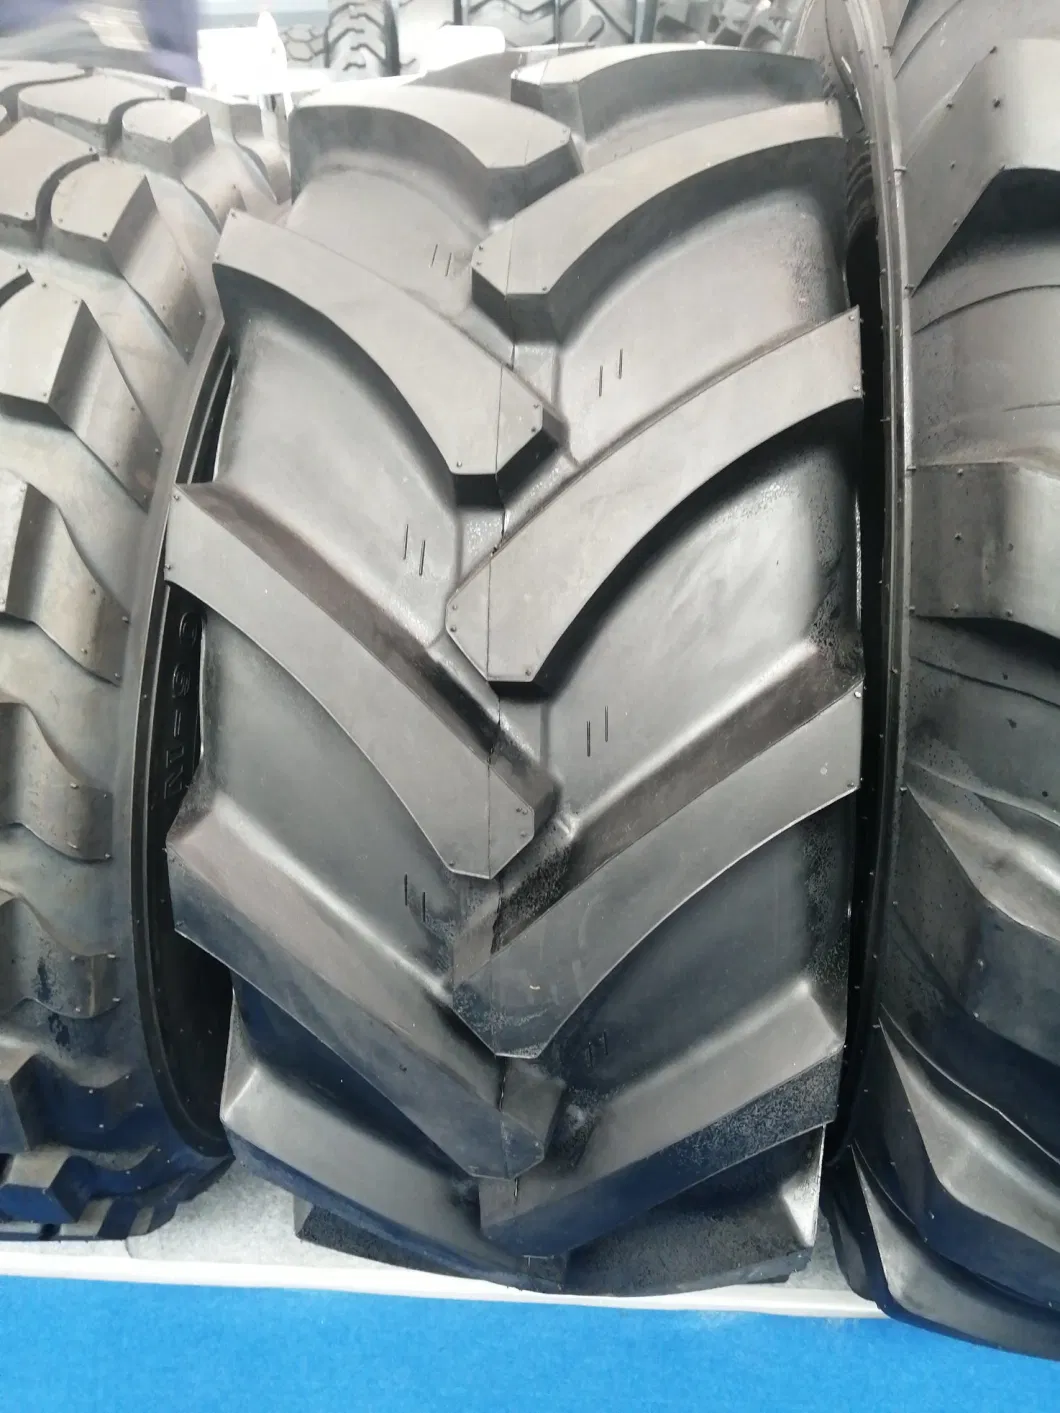 Agricultural Farm Tyre with R-1 Pattern Tractor Harvester Rear Wheel Tyre 12.4-28 14.9-28